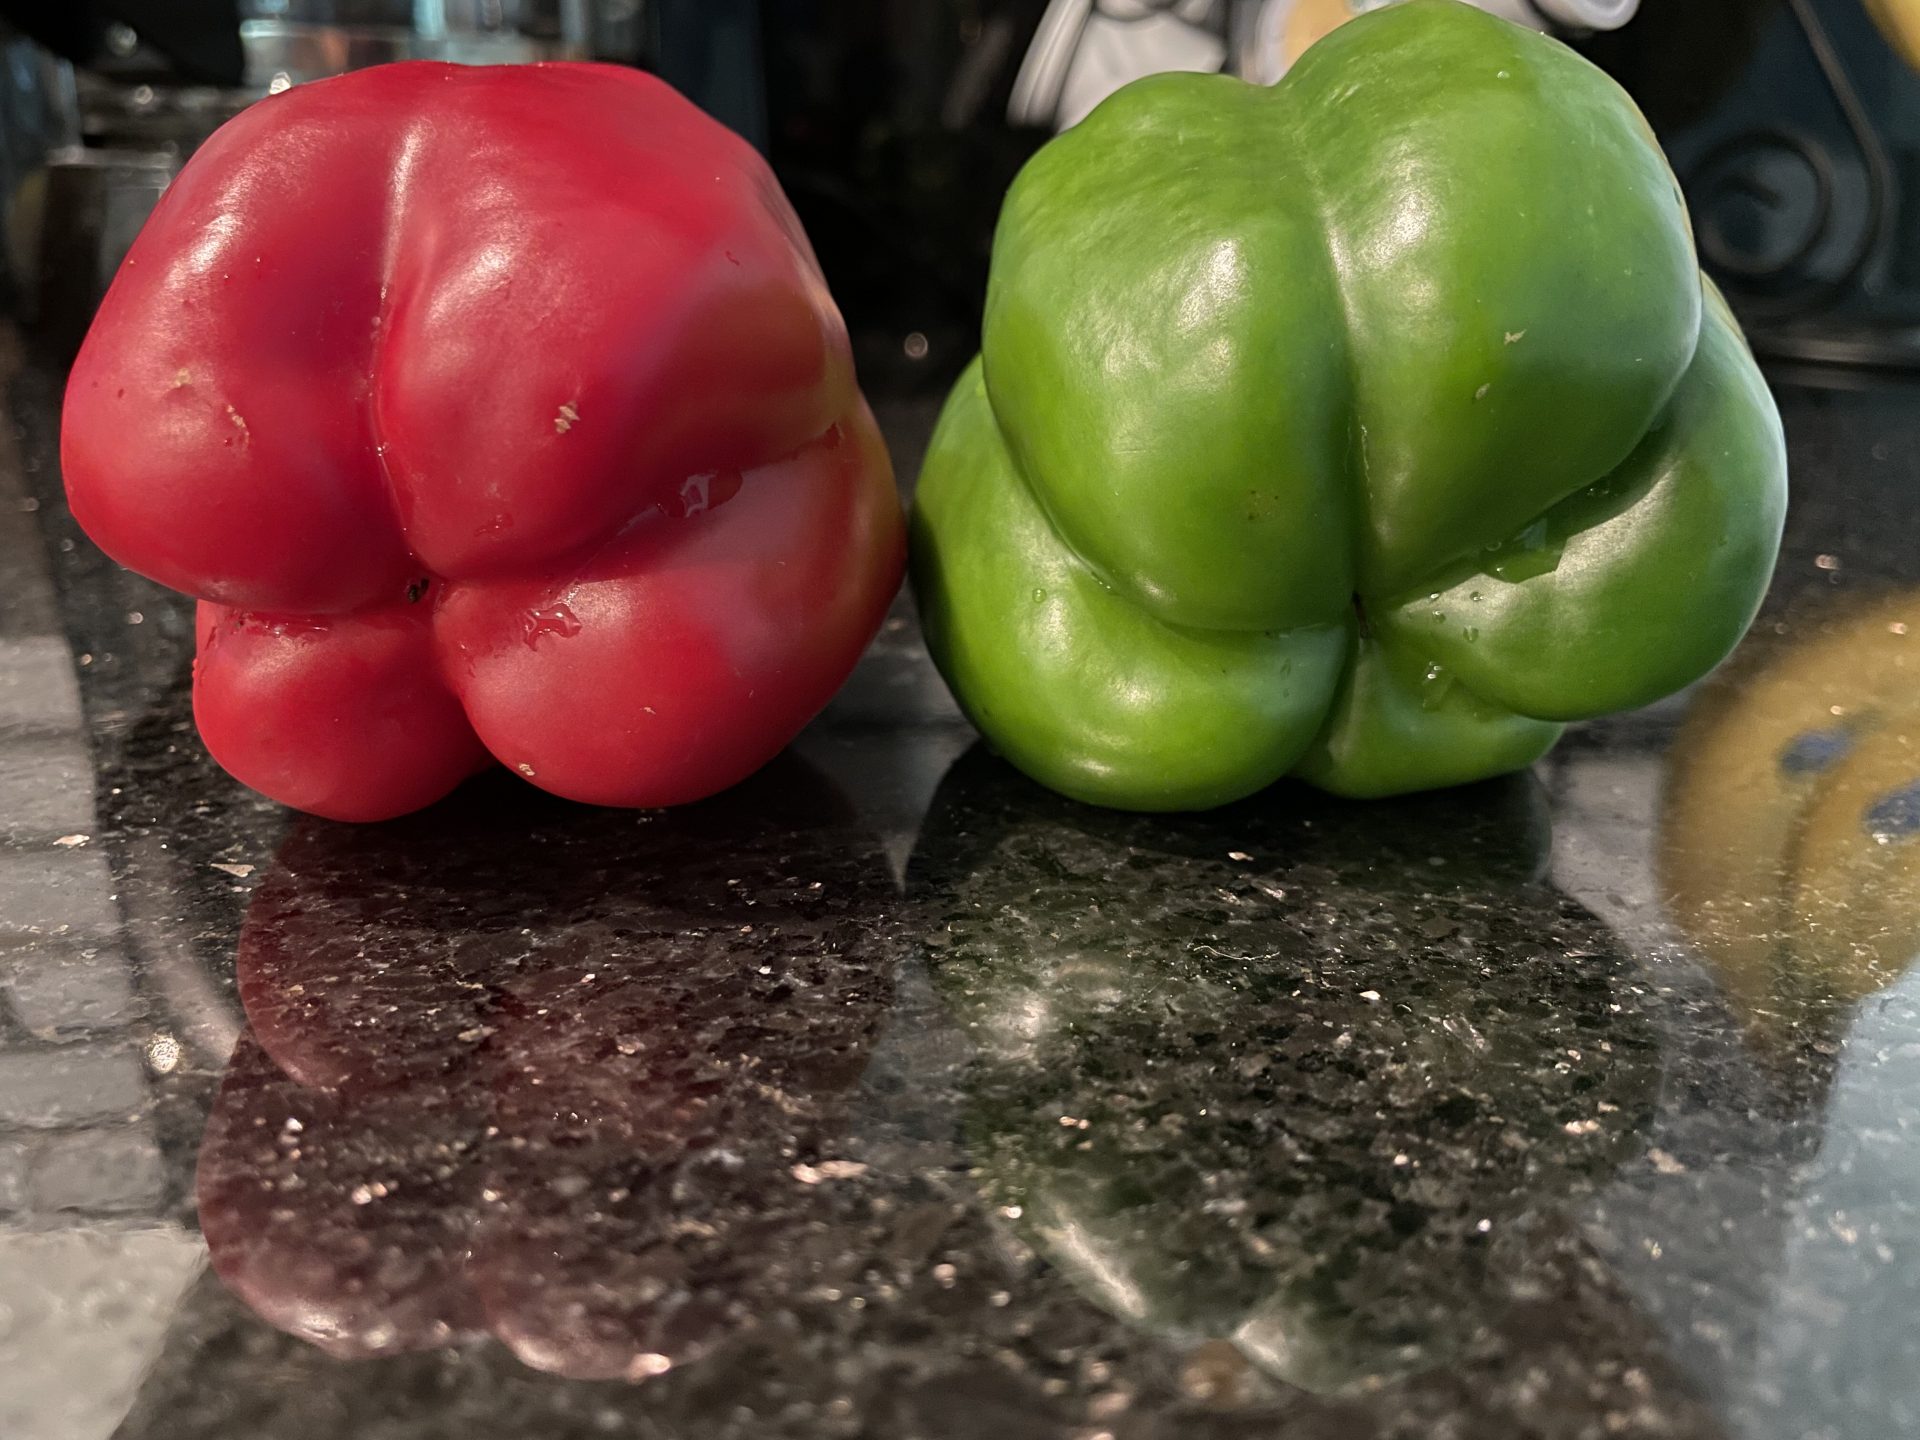 Hey Ed what do you think of Edmund’s 5 bump peppers?  Grew them all natural from his own seeds.  You’re impressed I know.  Love you miss you soooo much.❤️